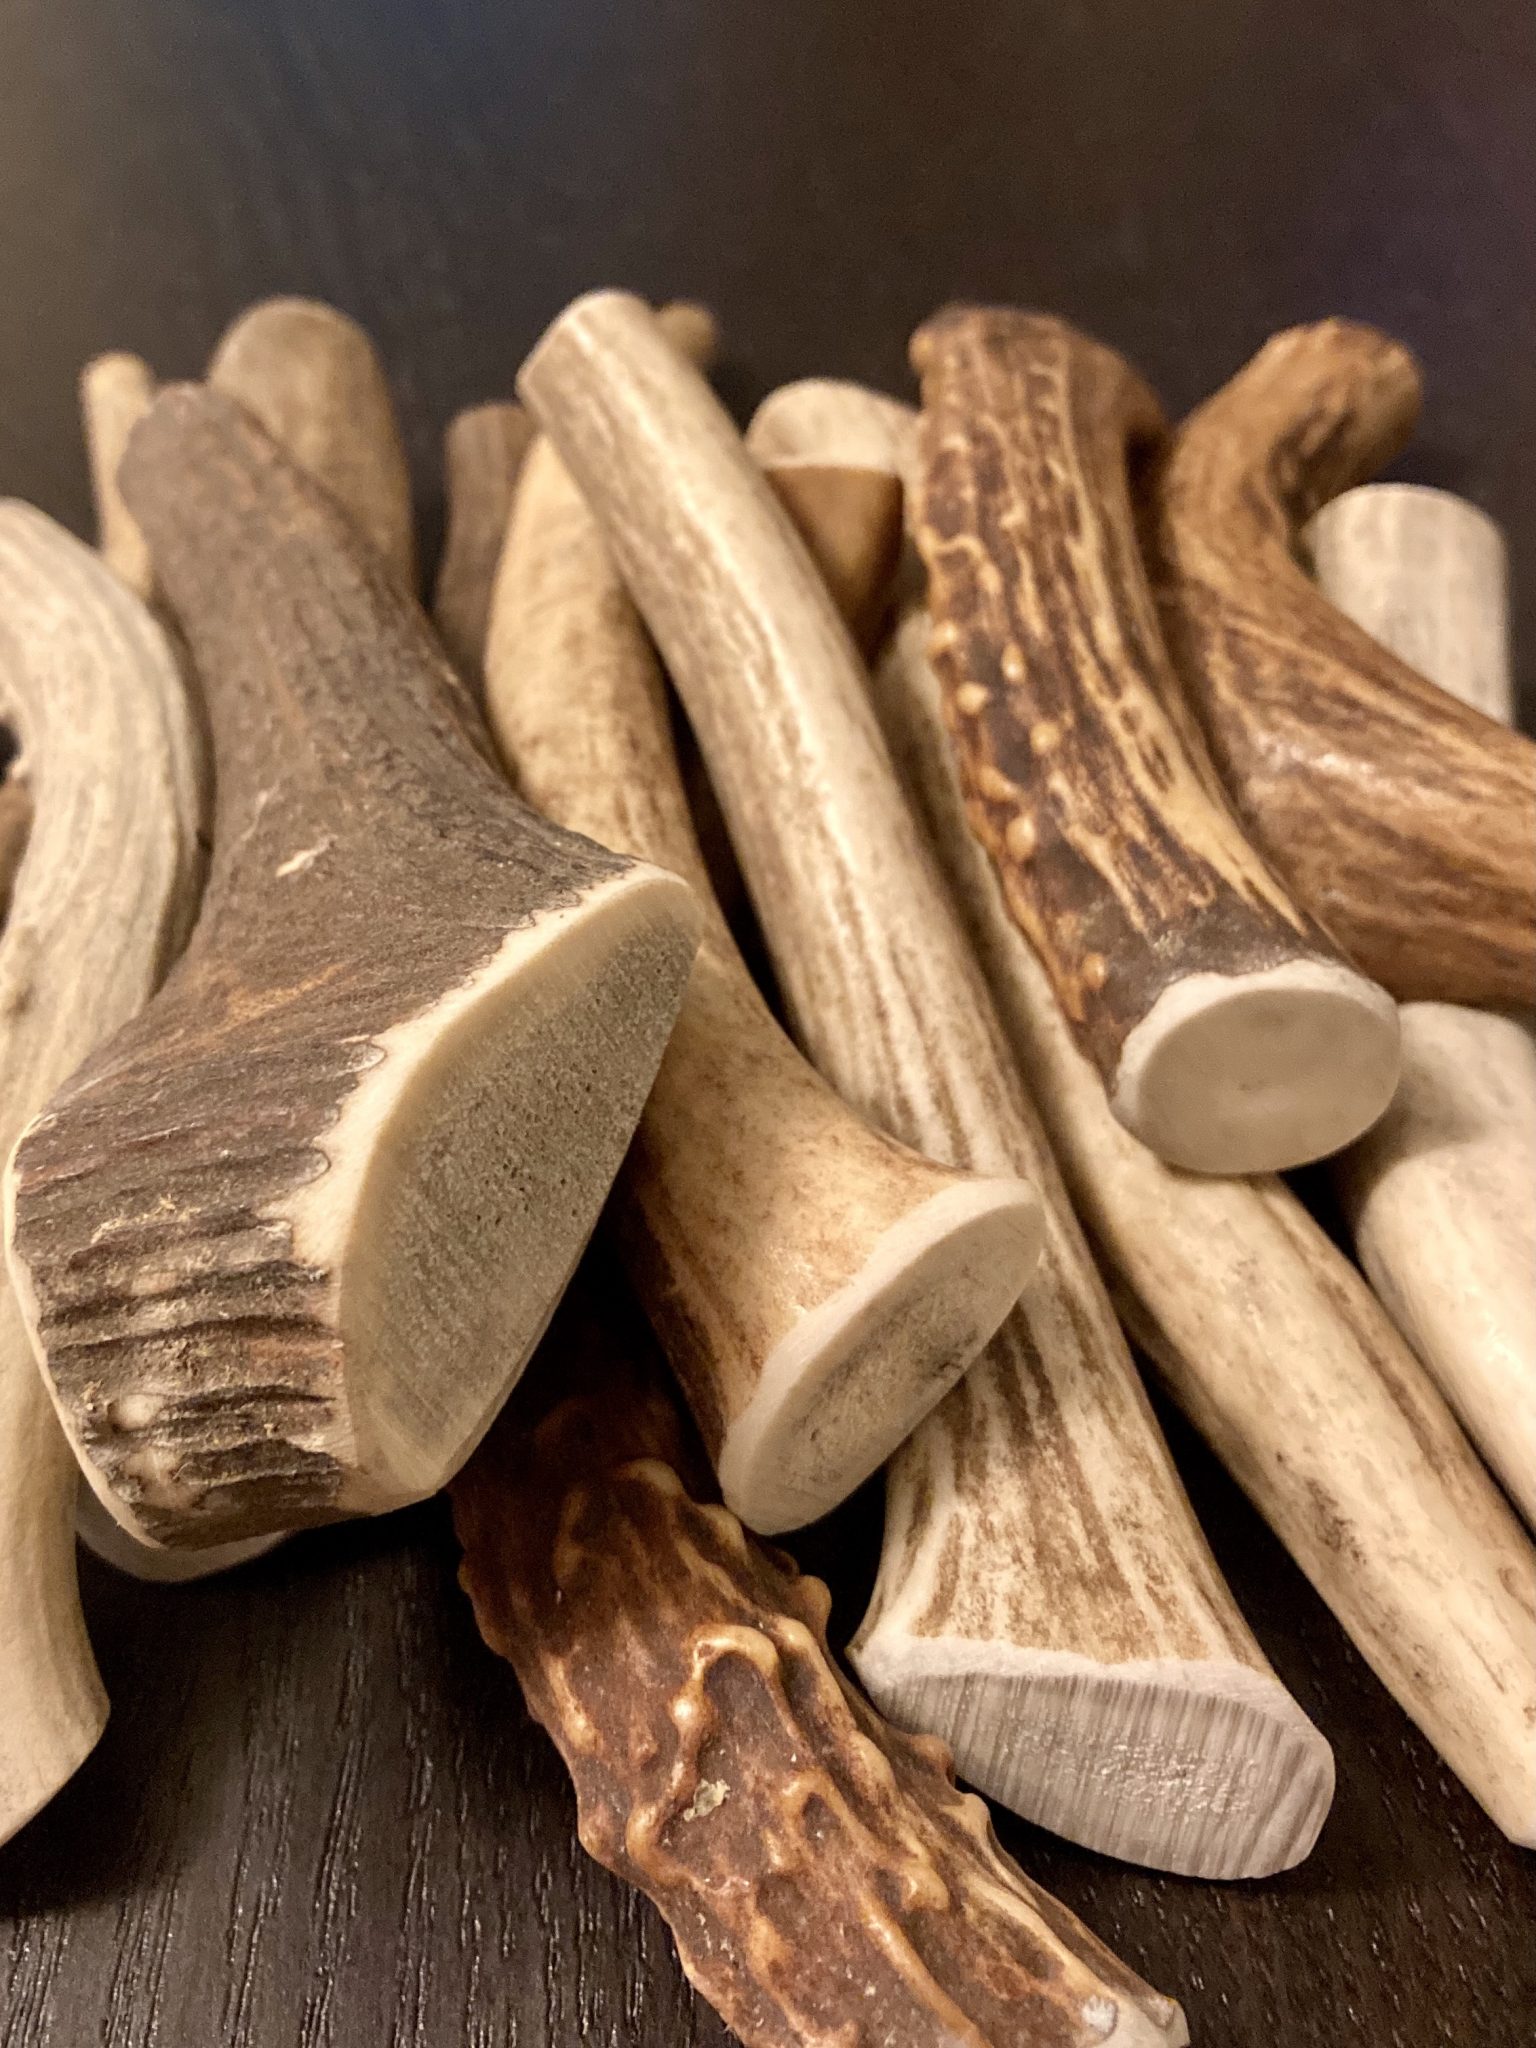 Whole Antlers Chews - airdriedtreats.pet hard chews for dogs